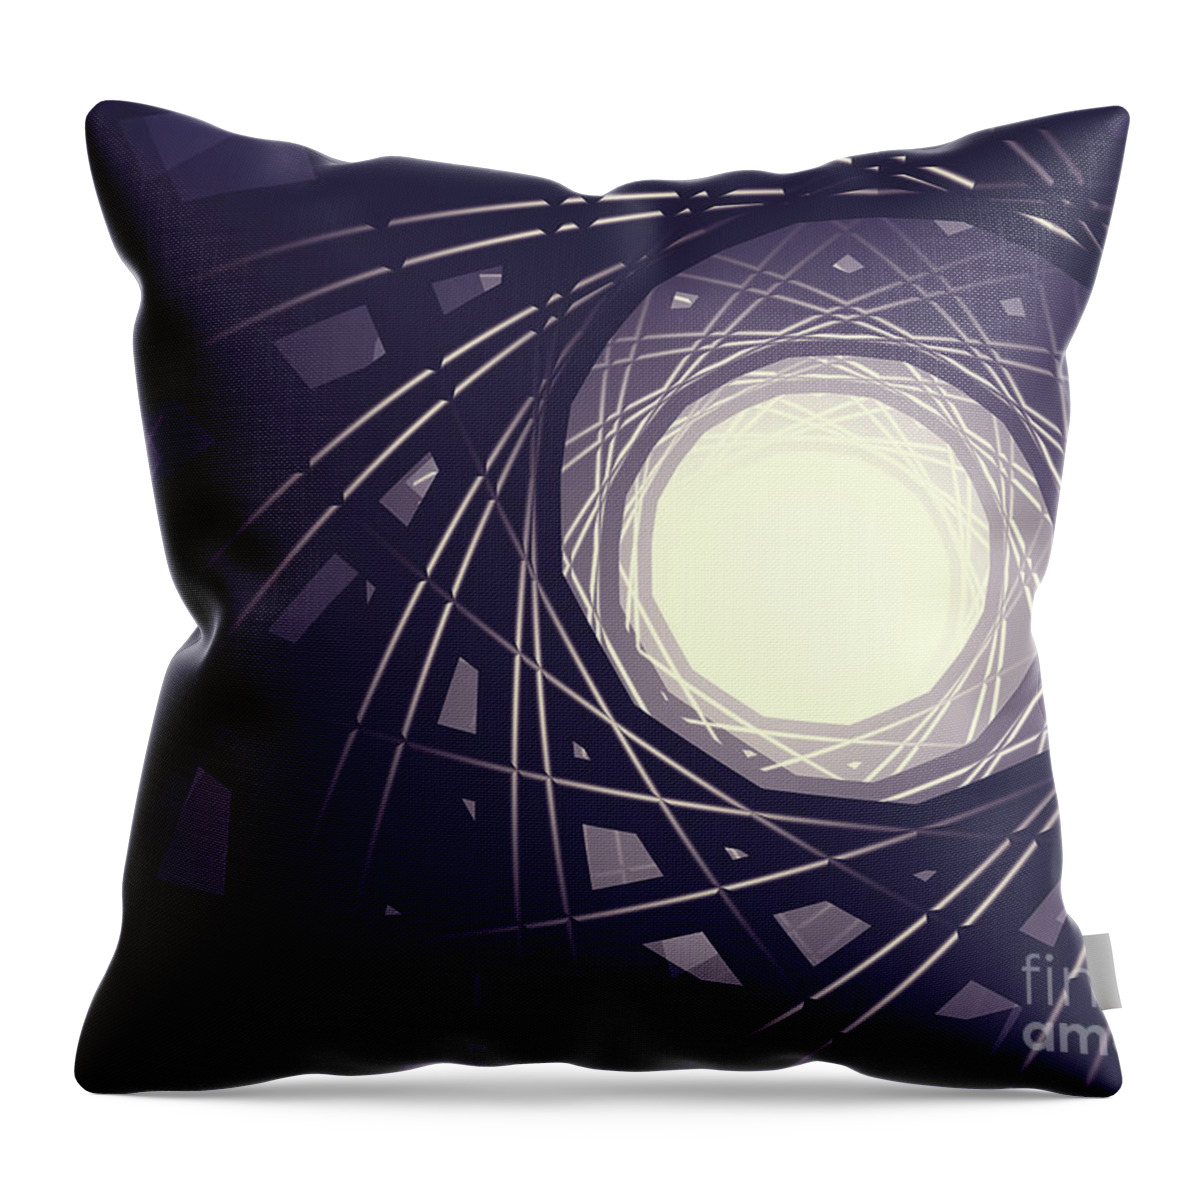 Optimism Throw Pillow featuring the digital art Light At The End of The Tunnel by Phil Perkins